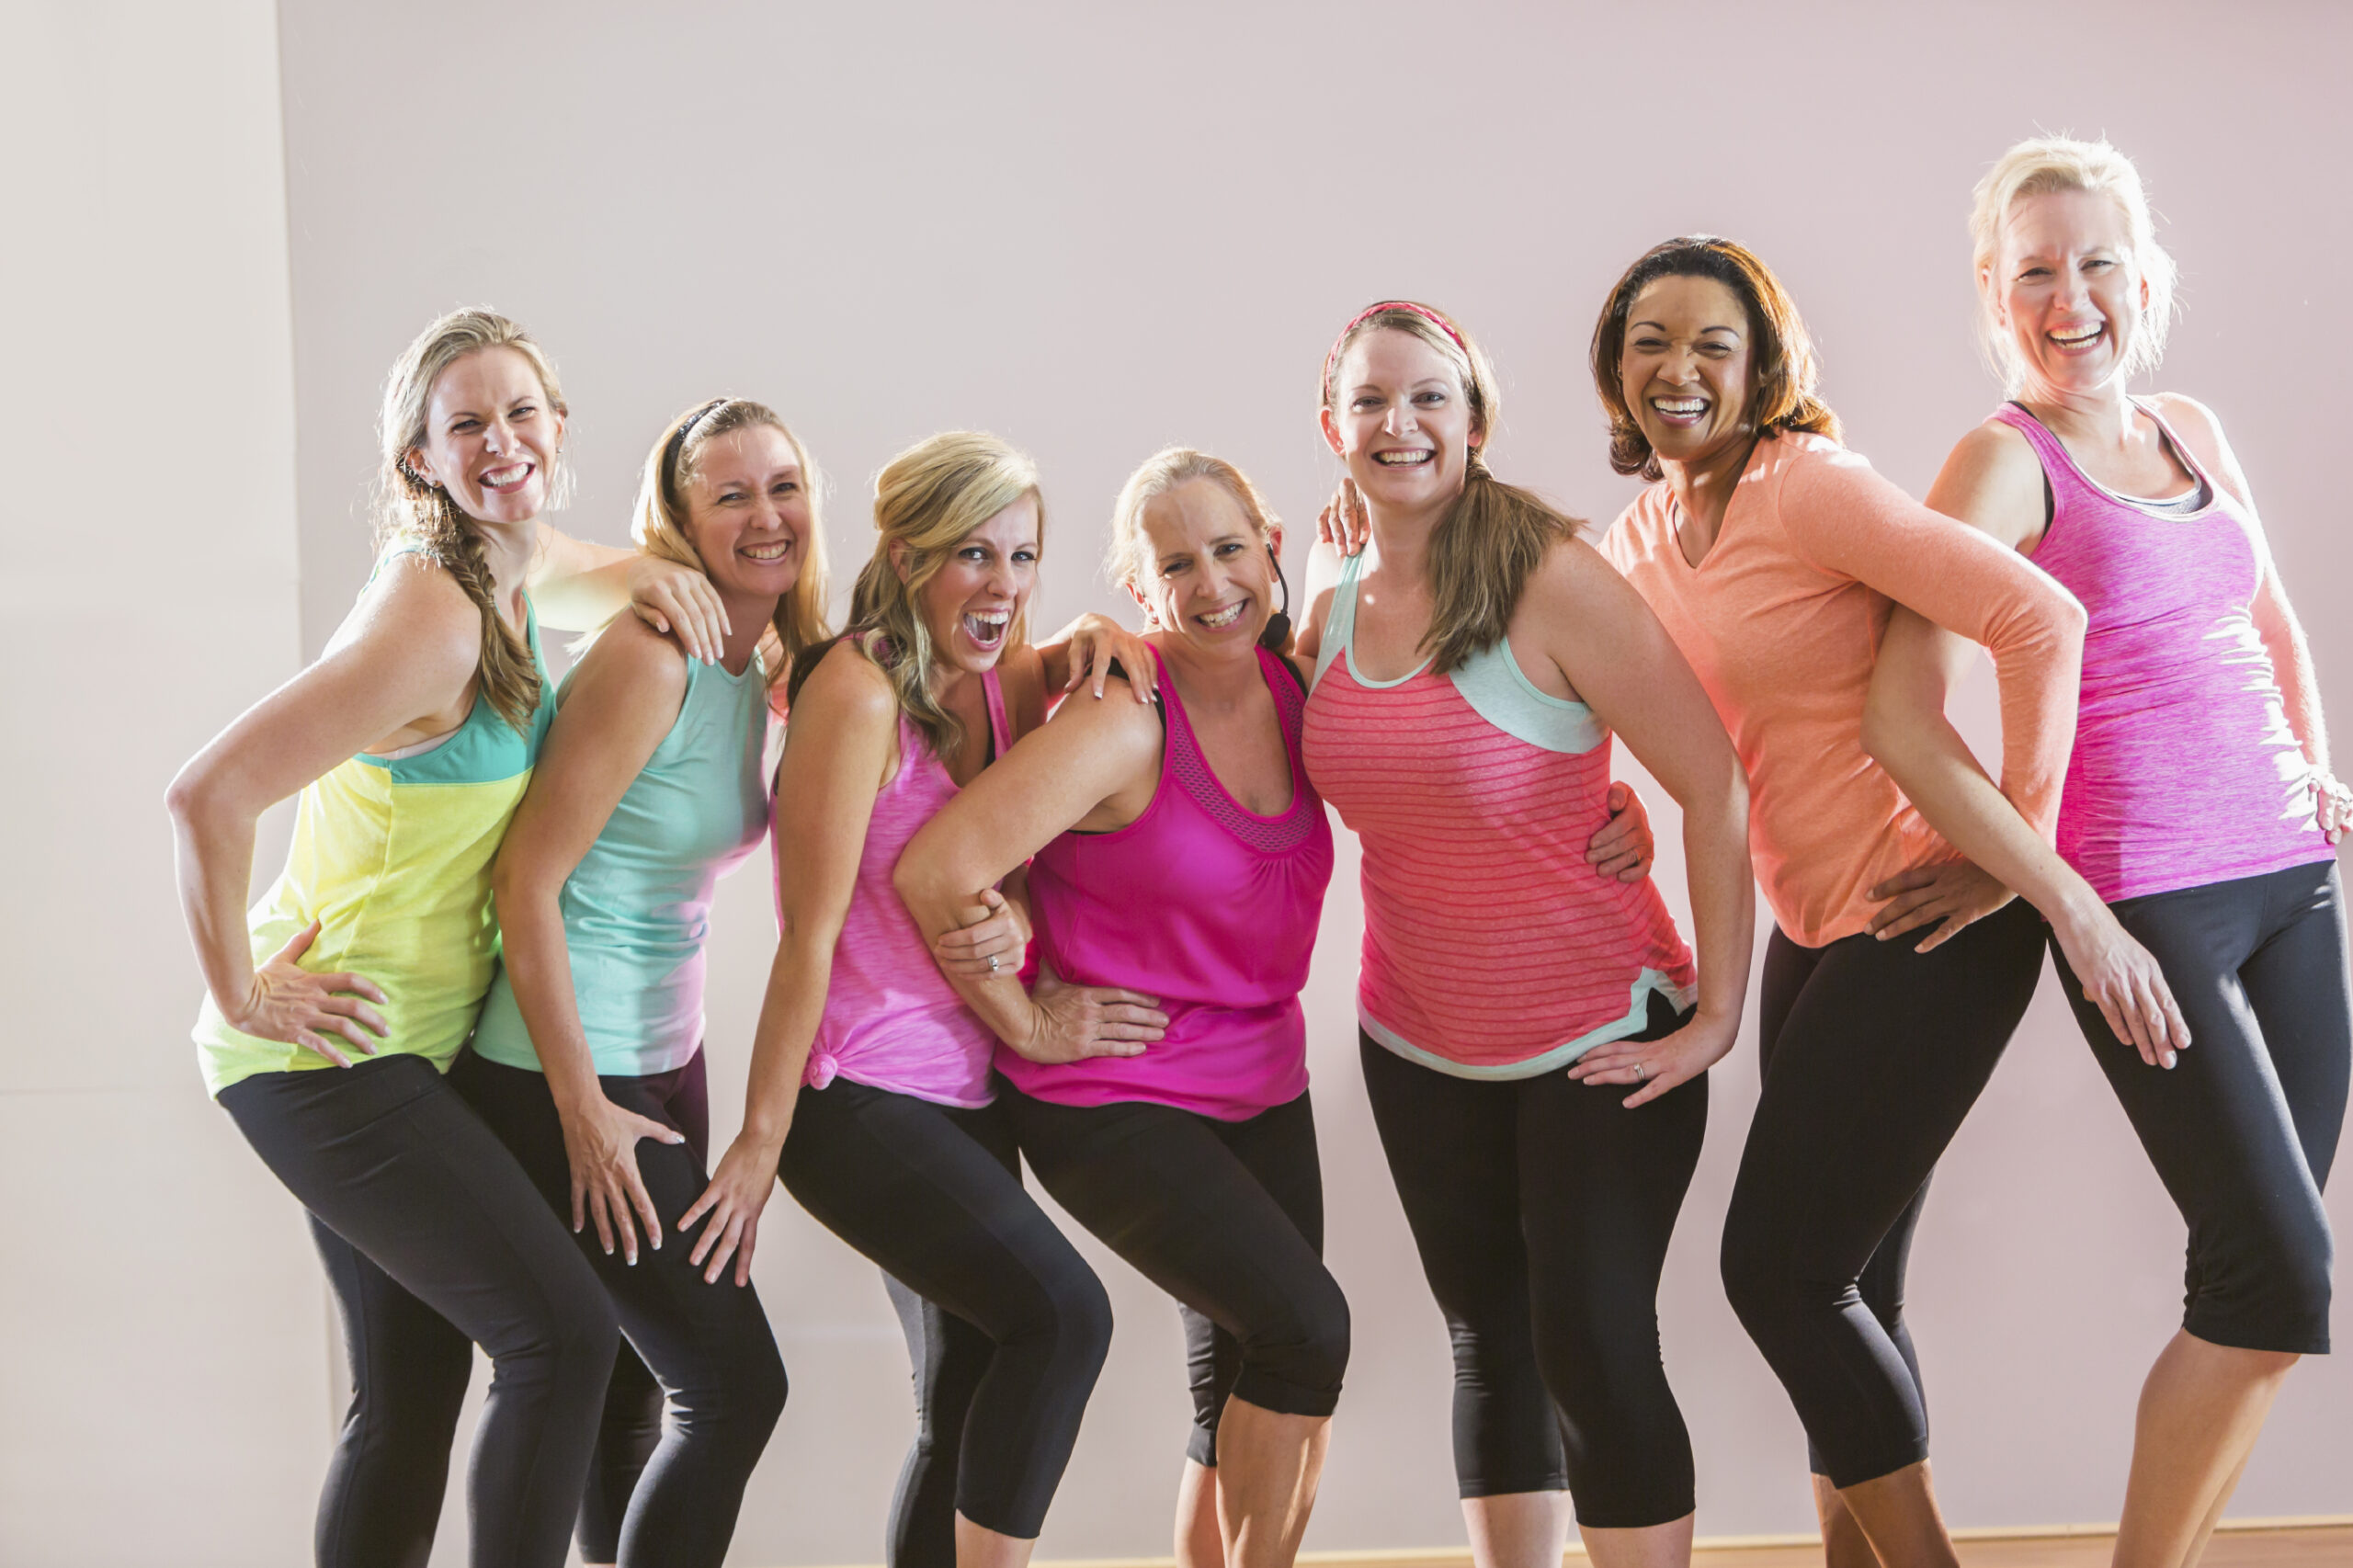 A group of women taking an exercise class, standing in a row posing for the camera.  The instructor, who is wearing a microphone, is standing in the center.